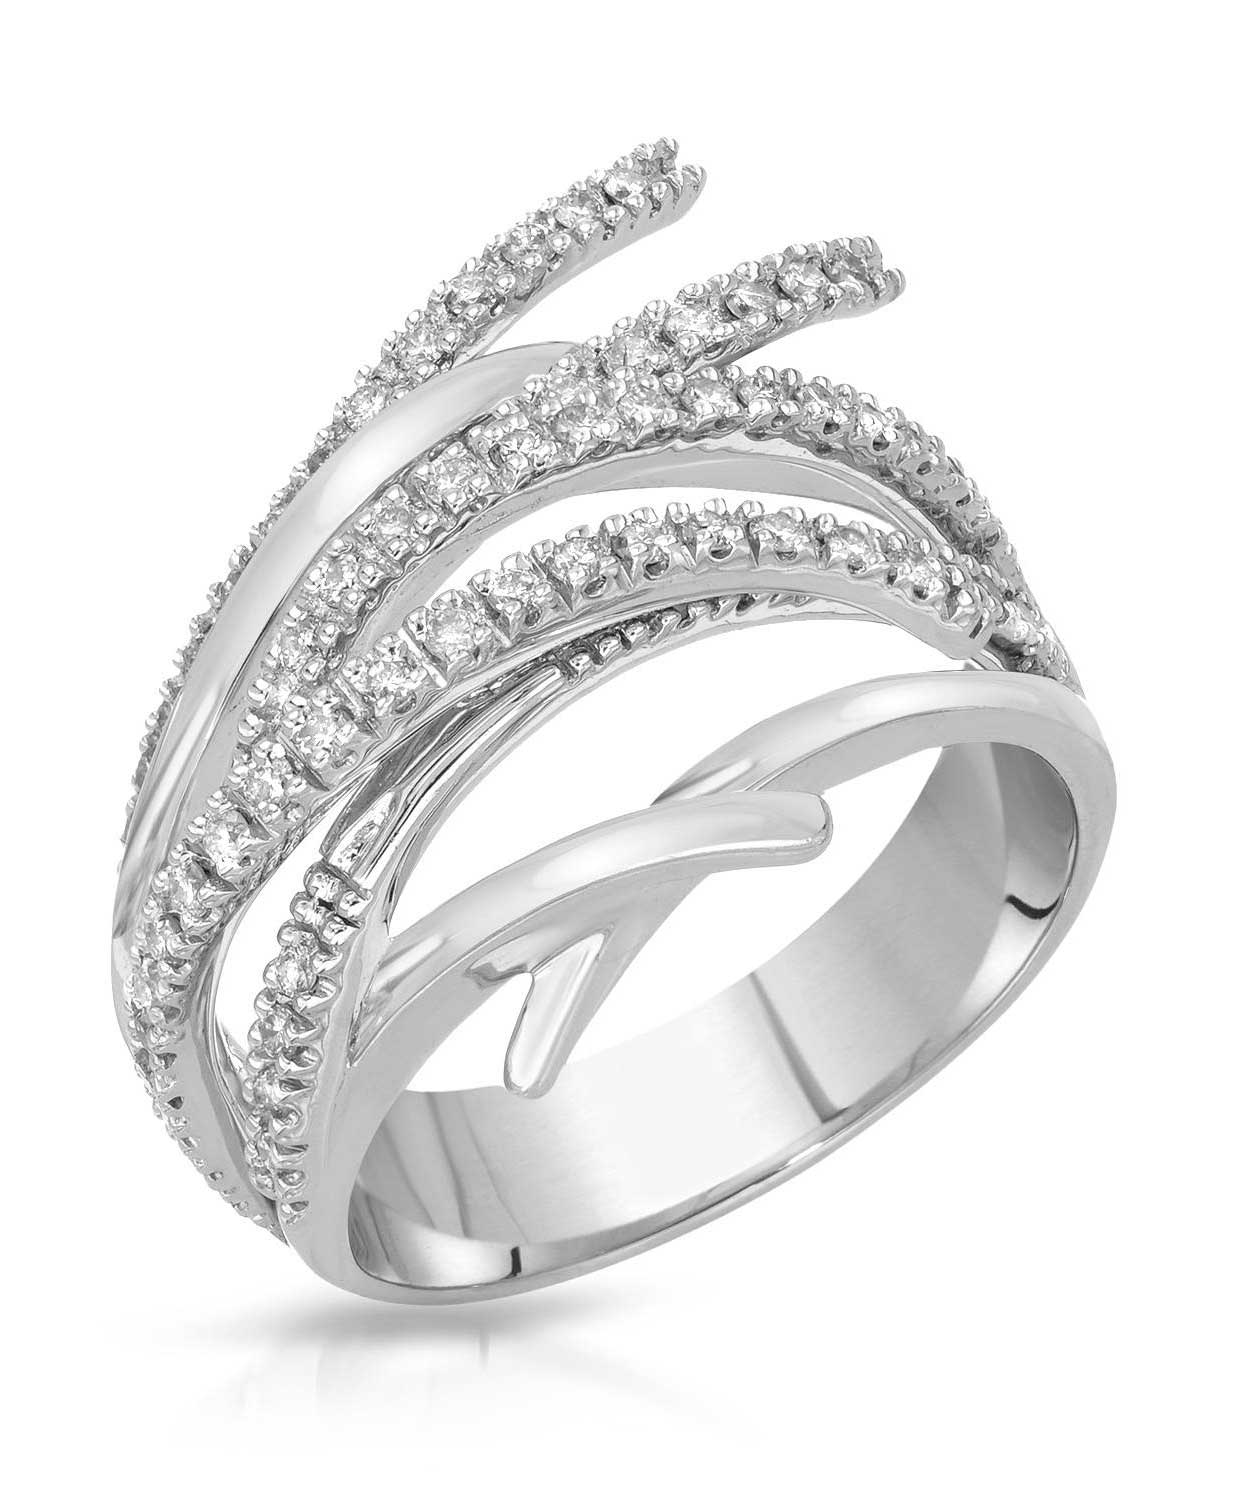 Allure Collection 0.67 ctw Diamond 14k White Gold Contemporary Ring View 1